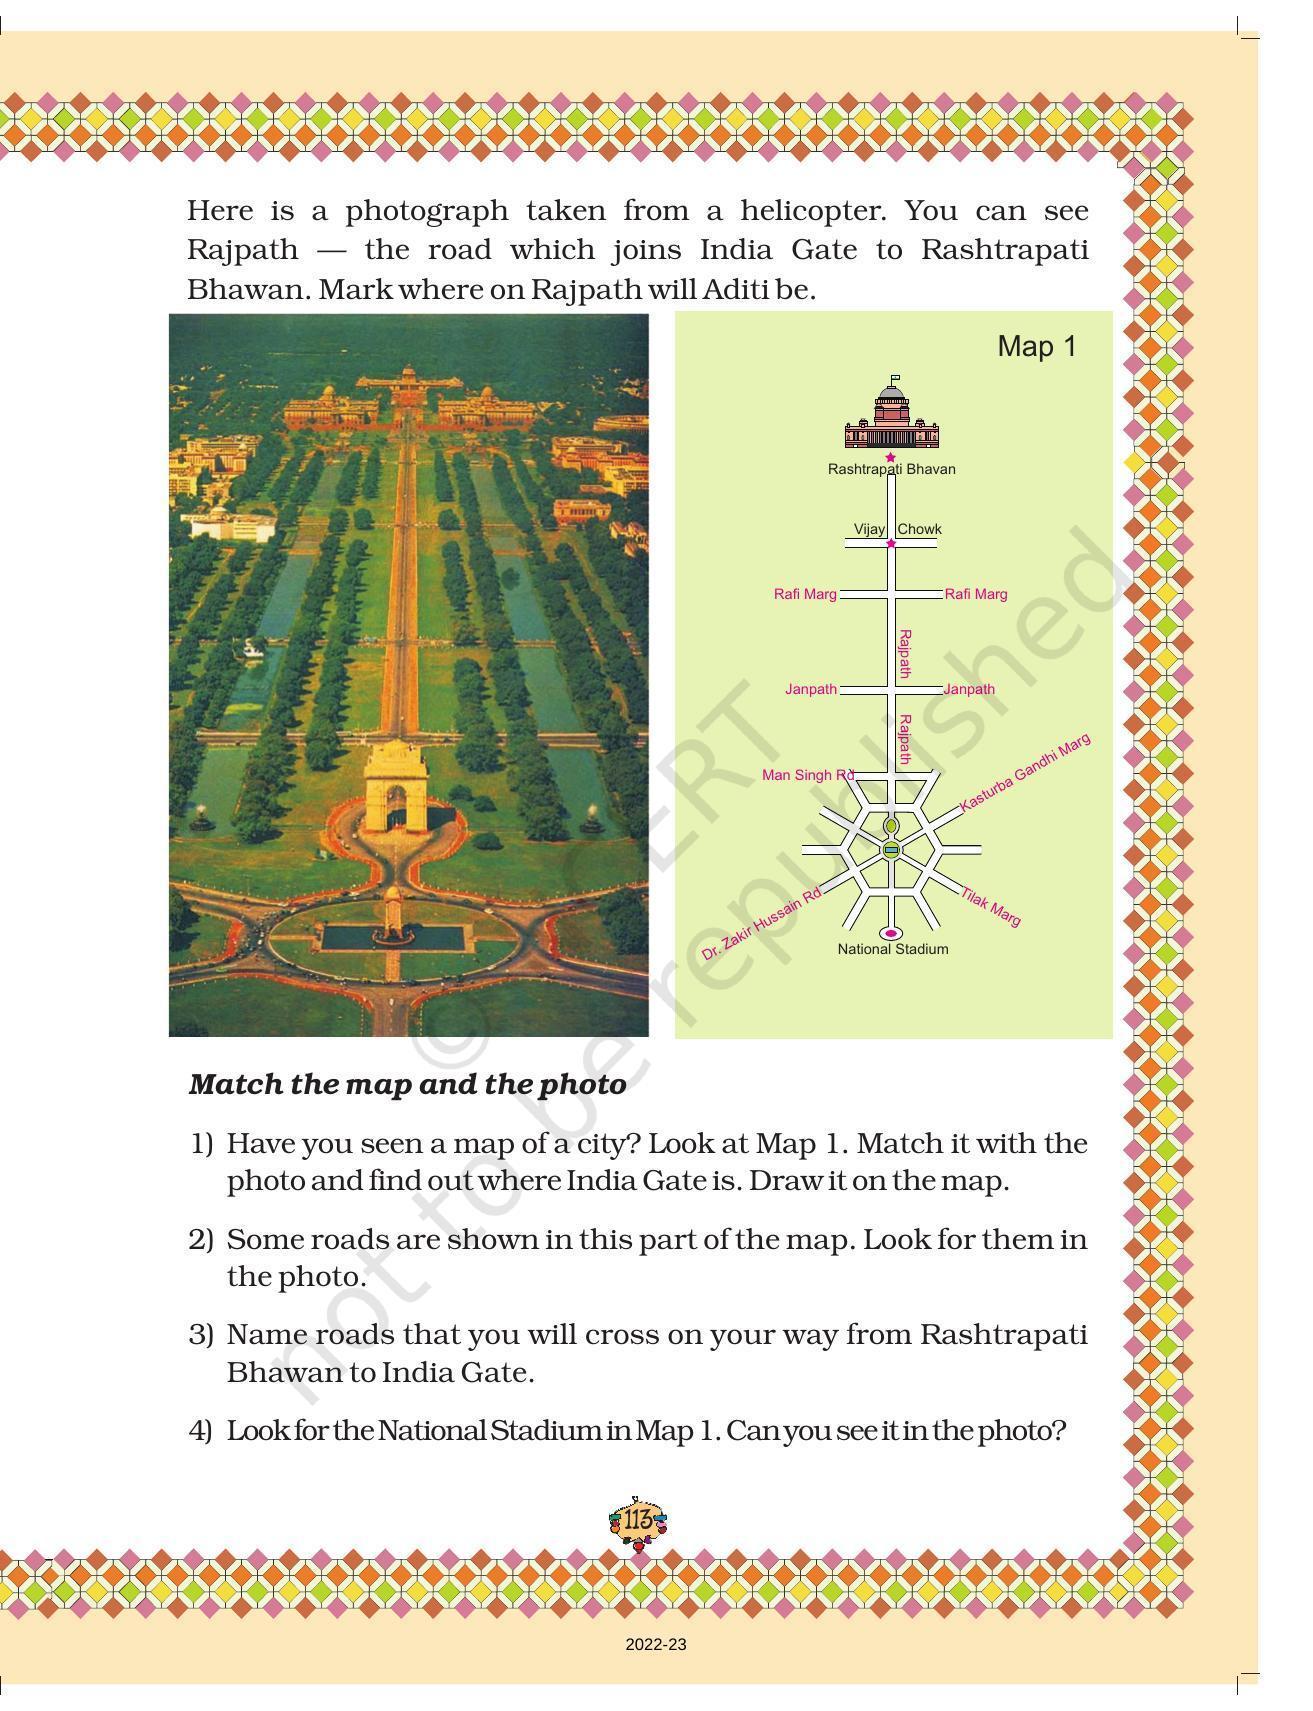 NCERT Book for Class 5 Maths Chapter 8 Mapping Your Way - Page 2